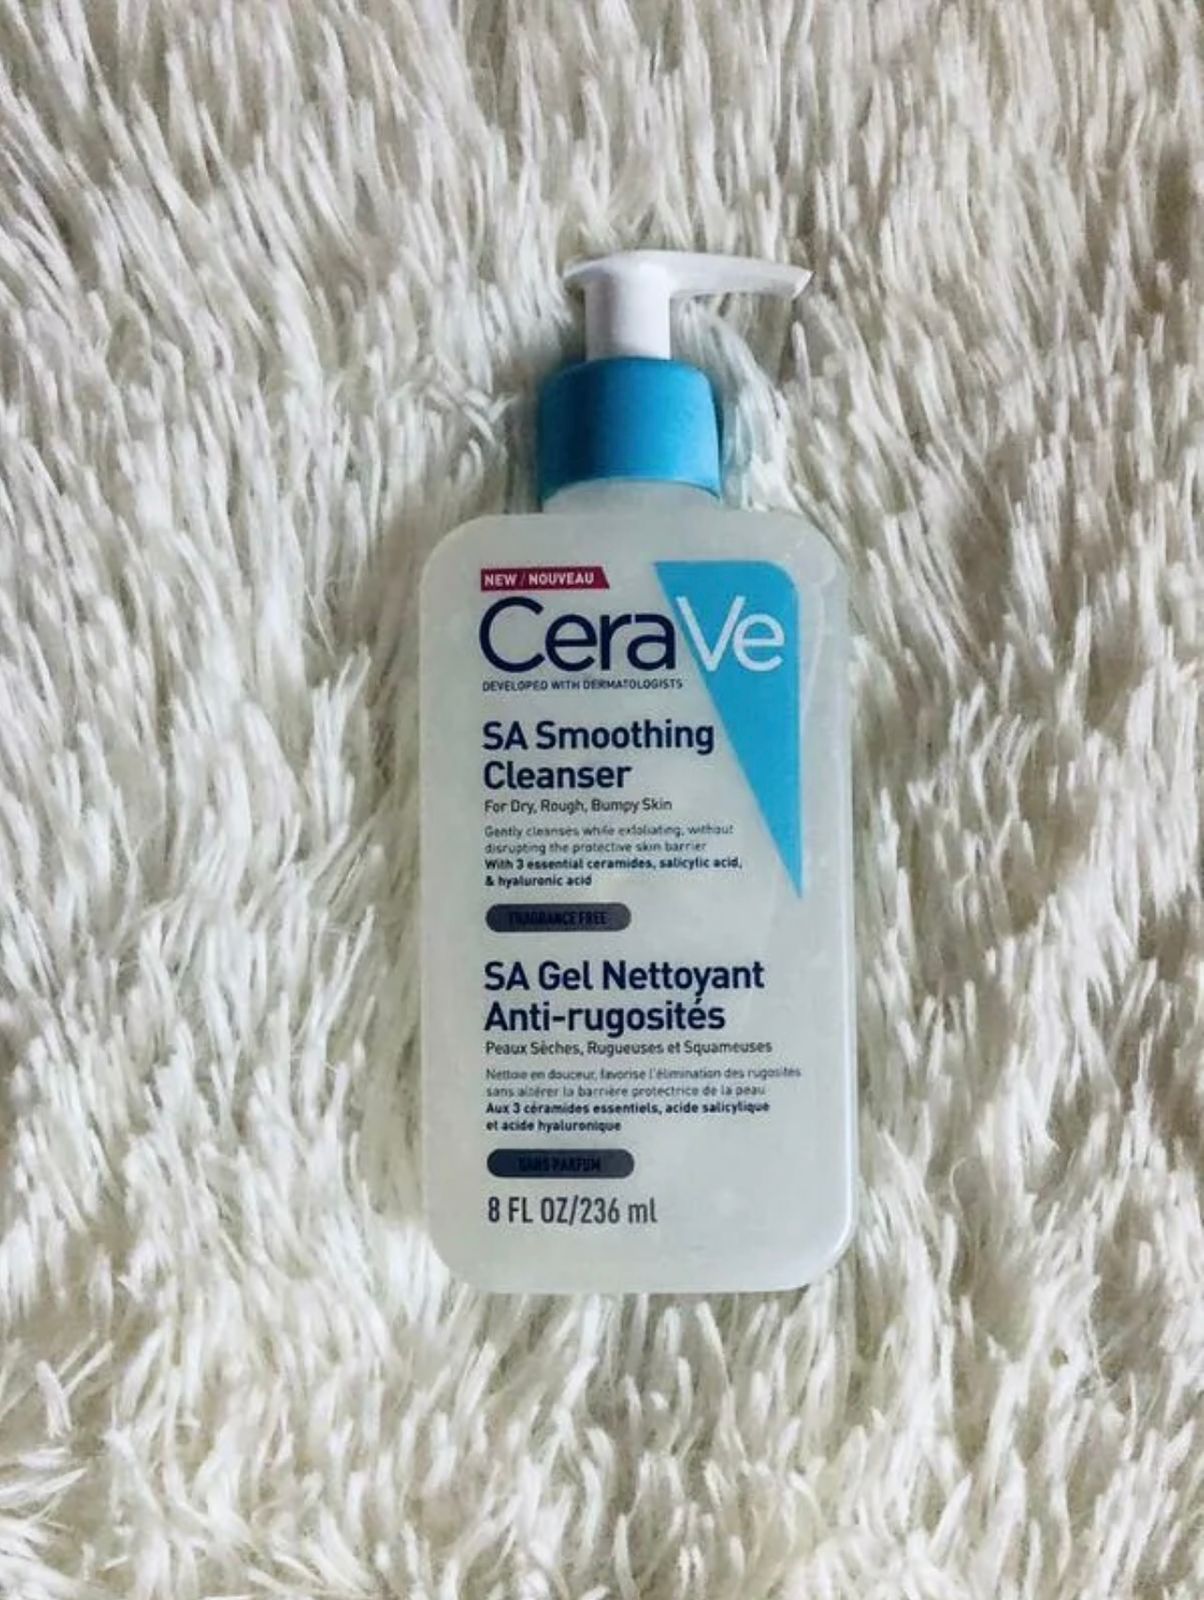 Smoothing cleanser. CERAVE sa Smoothing Cleanser. CERAVE sa гель. CERAVE sa Smoothing Cleanser sa Gel nettoyant Anti rugosites. CERAVE Renewing sa Cleanser гель.